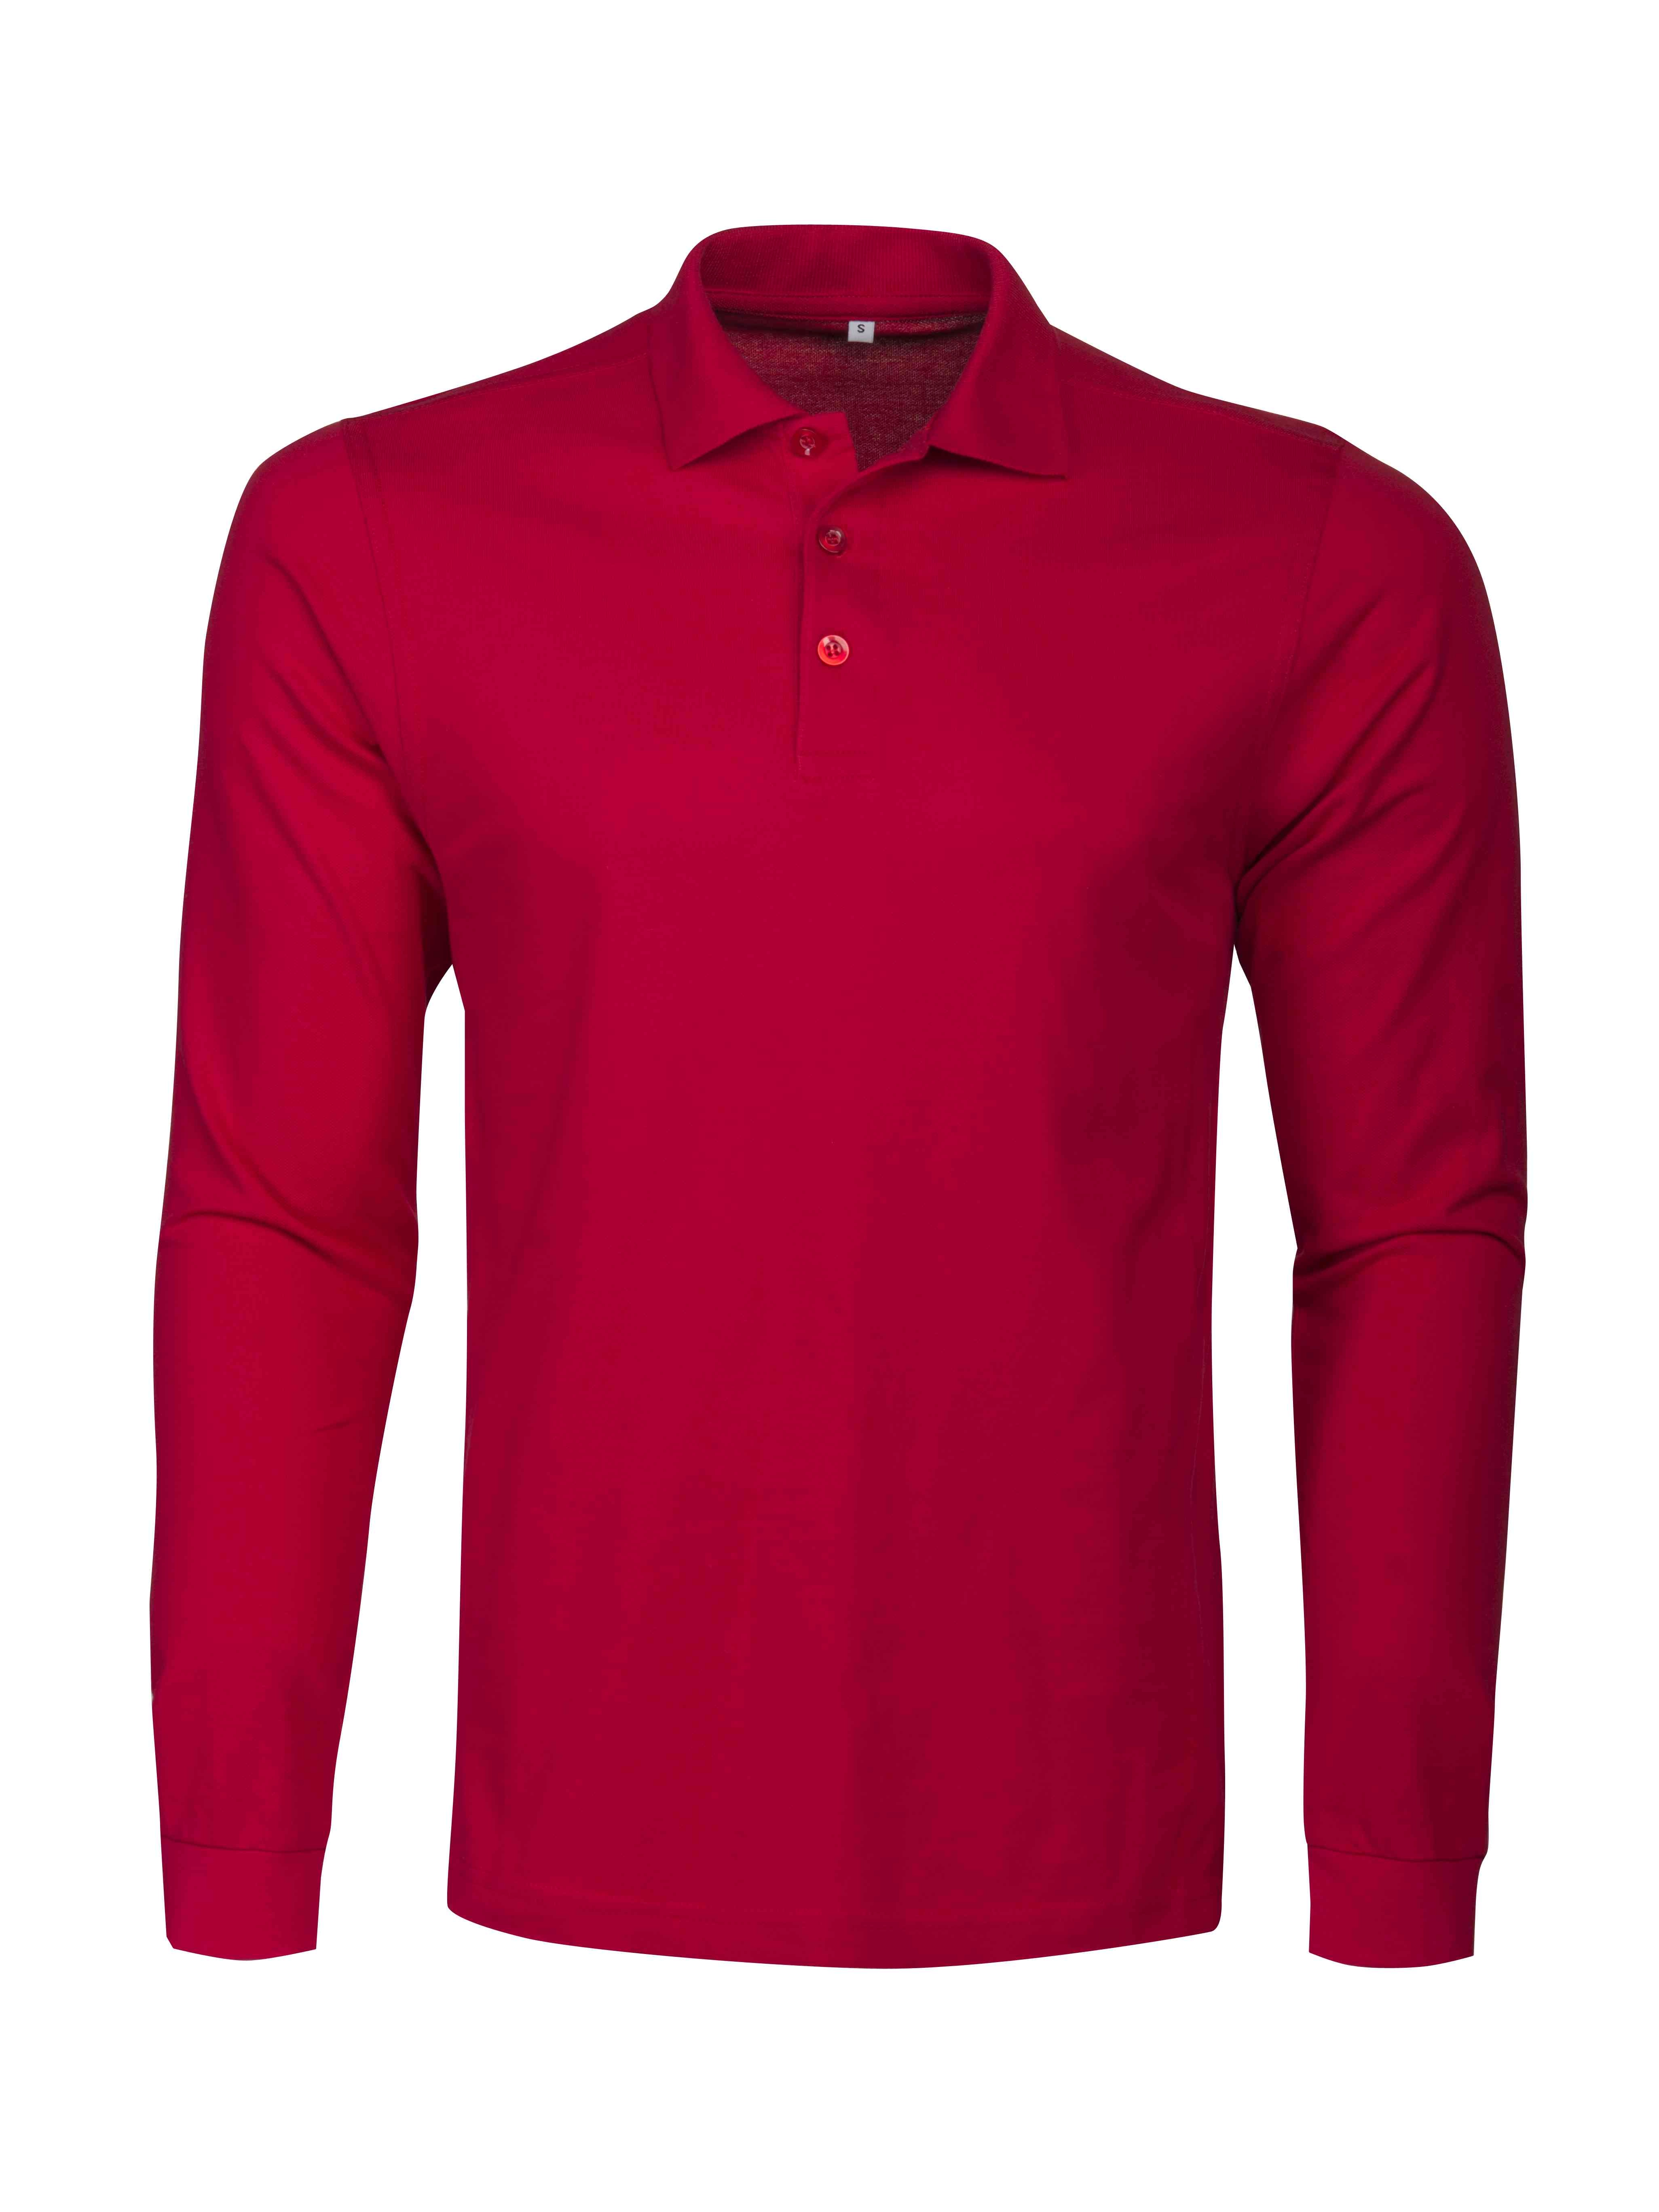 SURF POLO RSX L/S RED PE-2265011-400-10